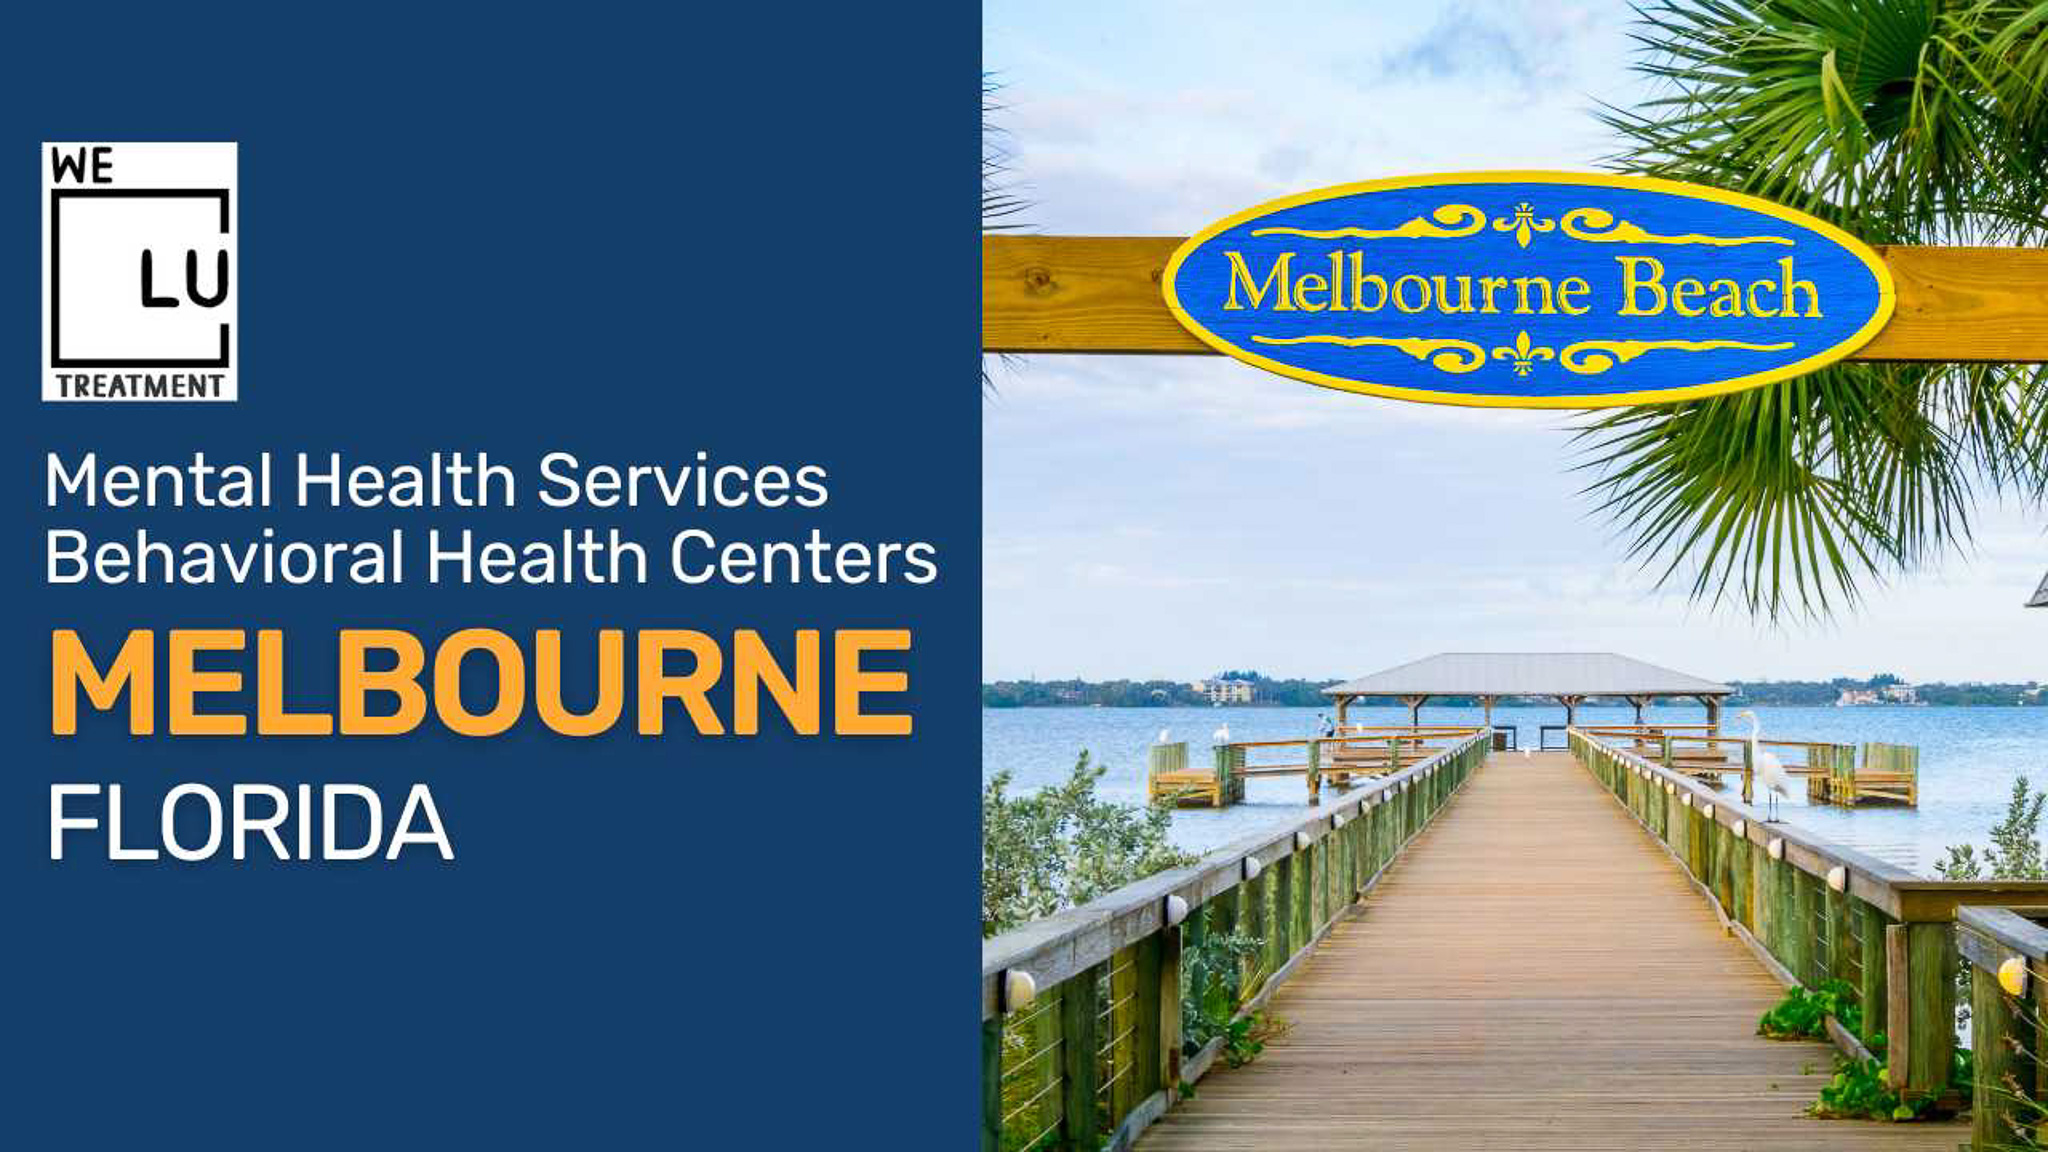 Melbourne FL (MH) We Level Up treatment center for drug and alcohol rehab detox and mental health services - Image 1